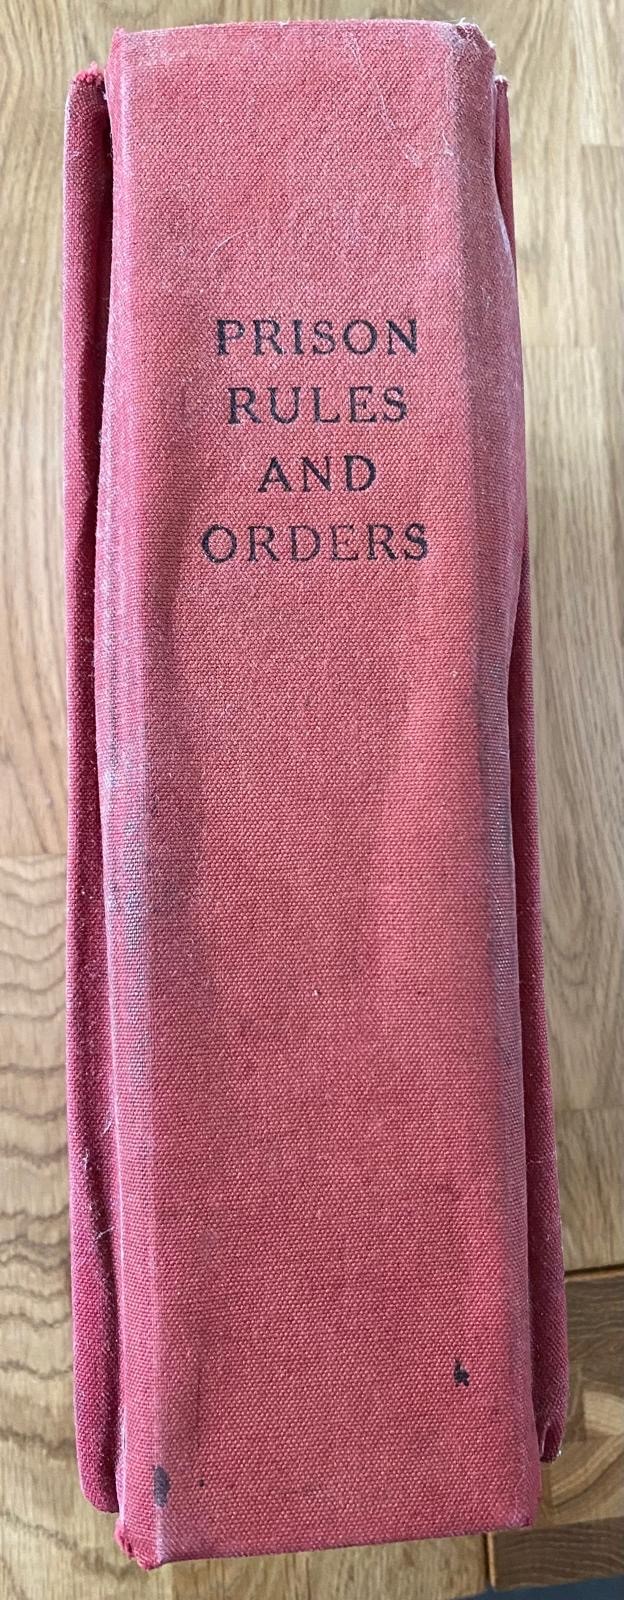 A 1933 Prison Rule book showing a fascinating insight into the early prison system covering such